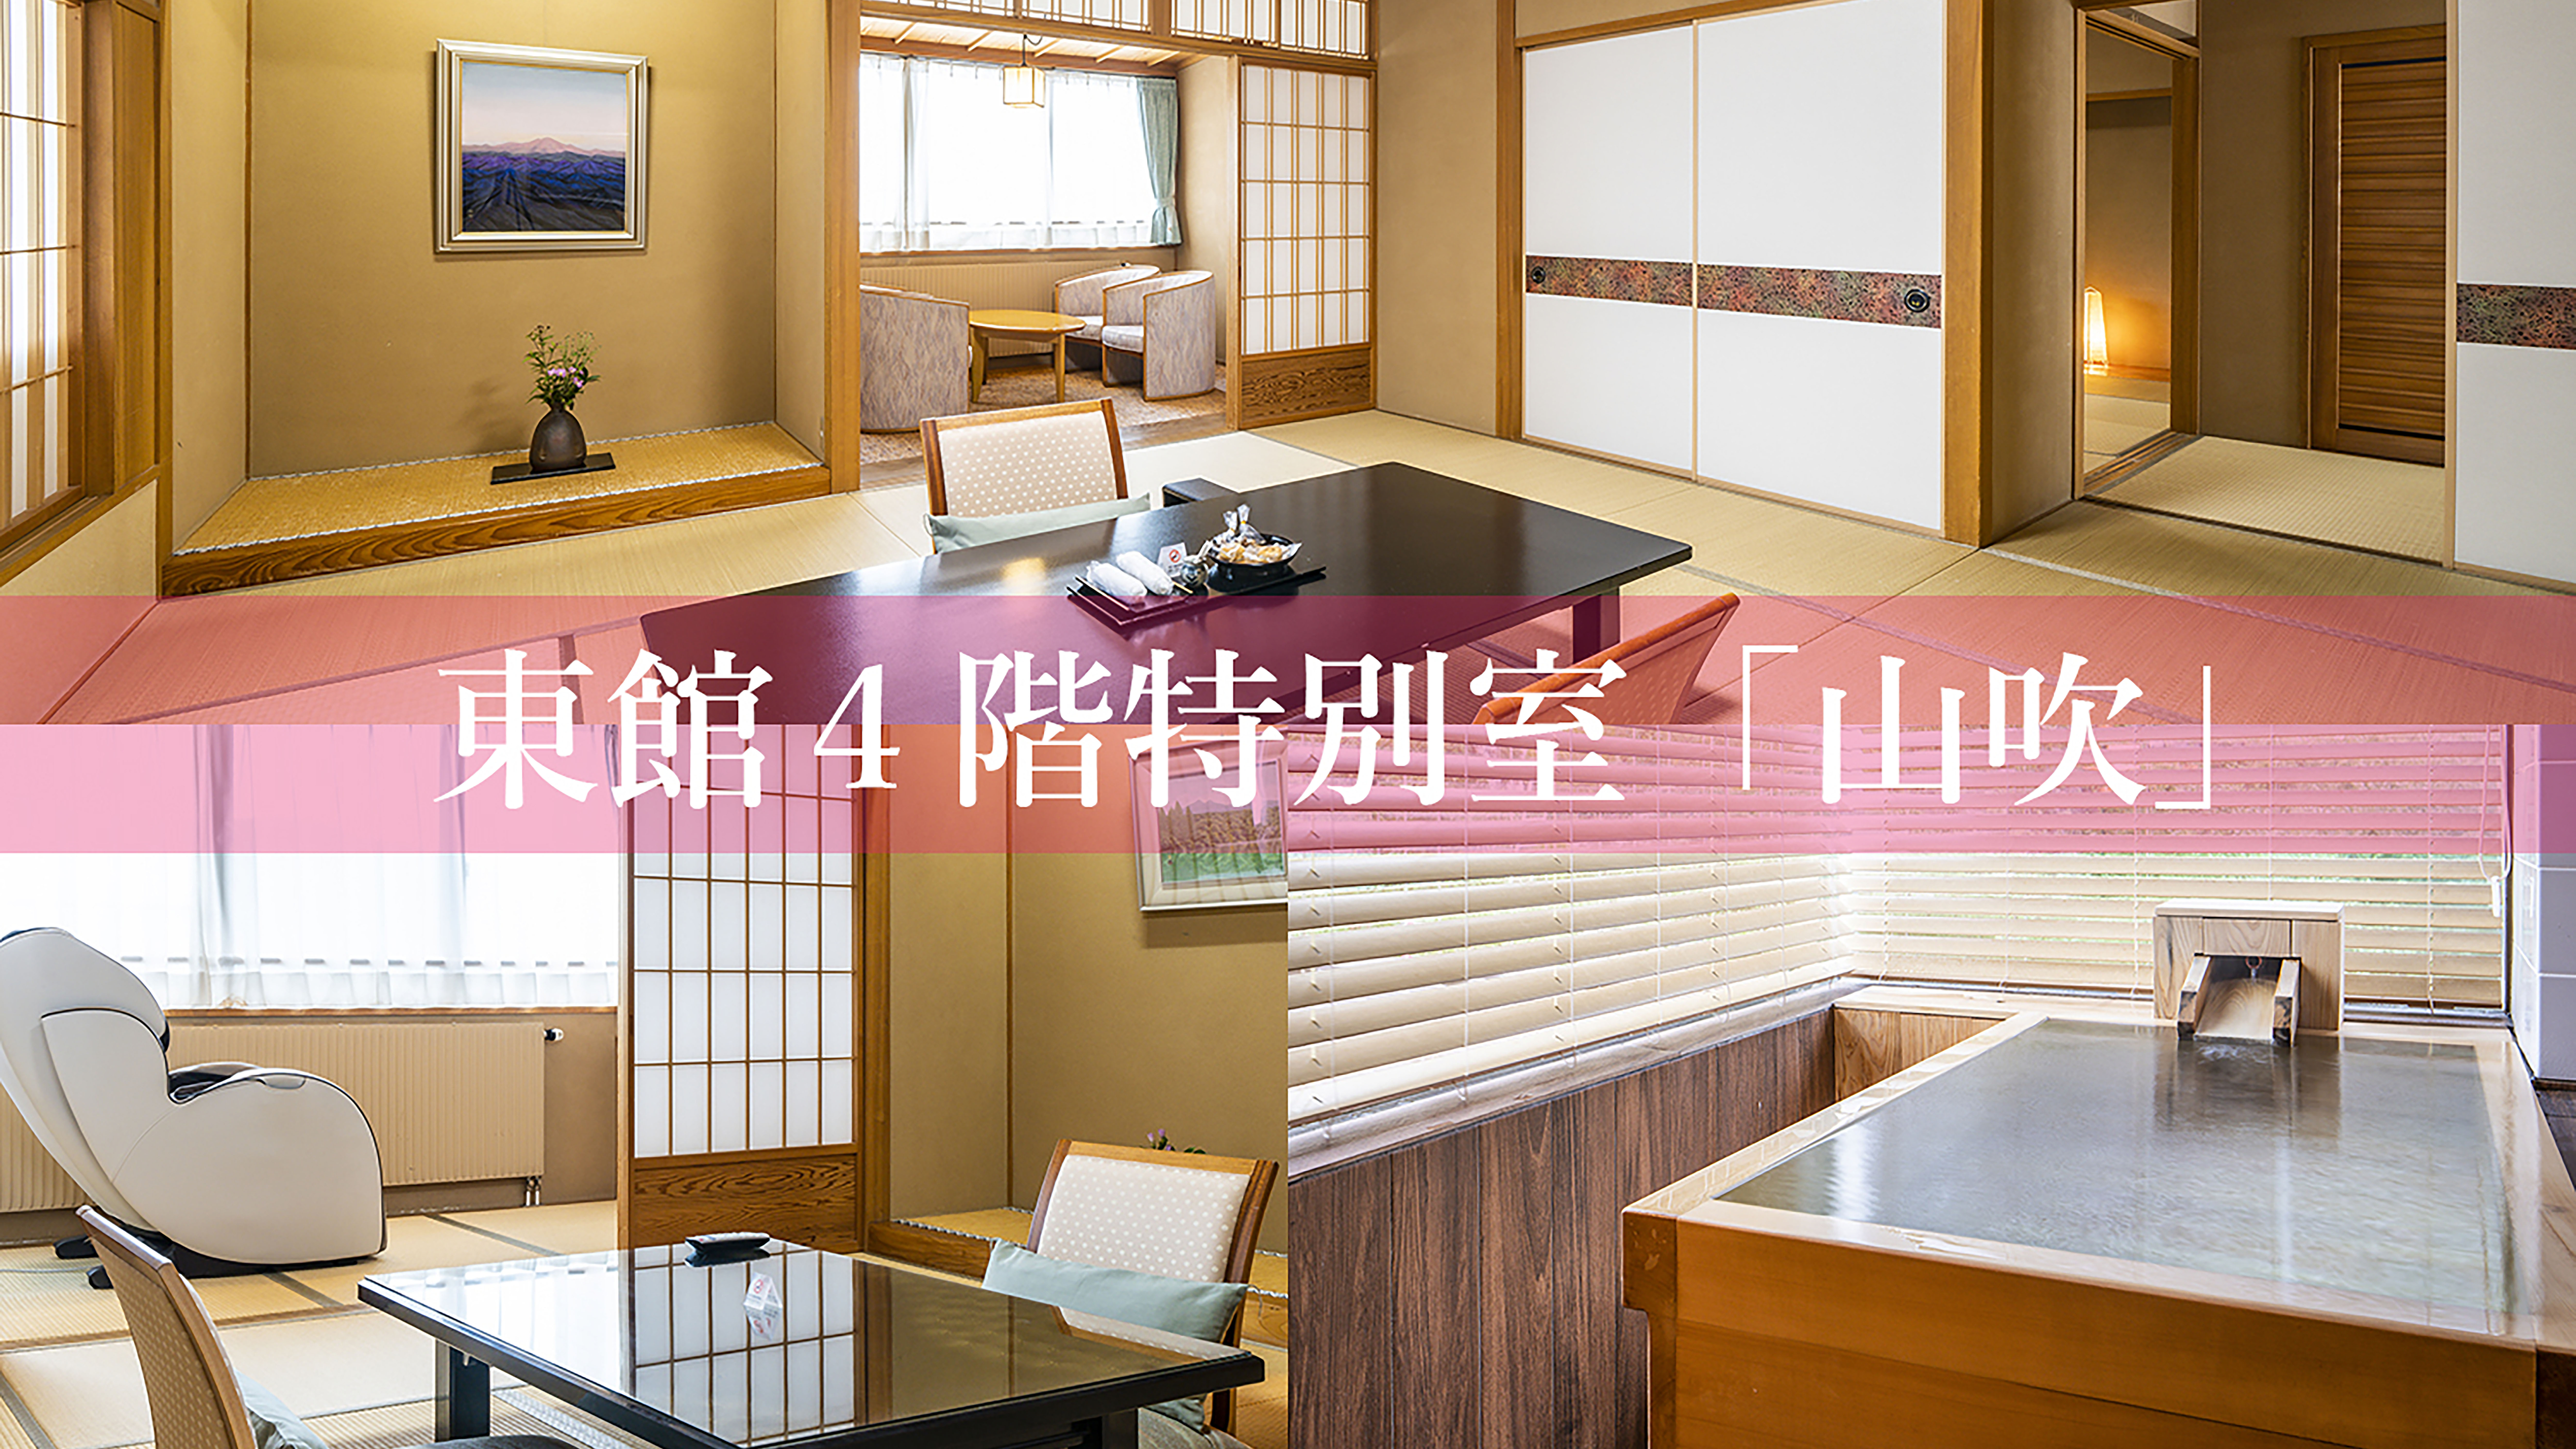 Special room "Yamabuki" with hot spring on the 4th floor of the East Building